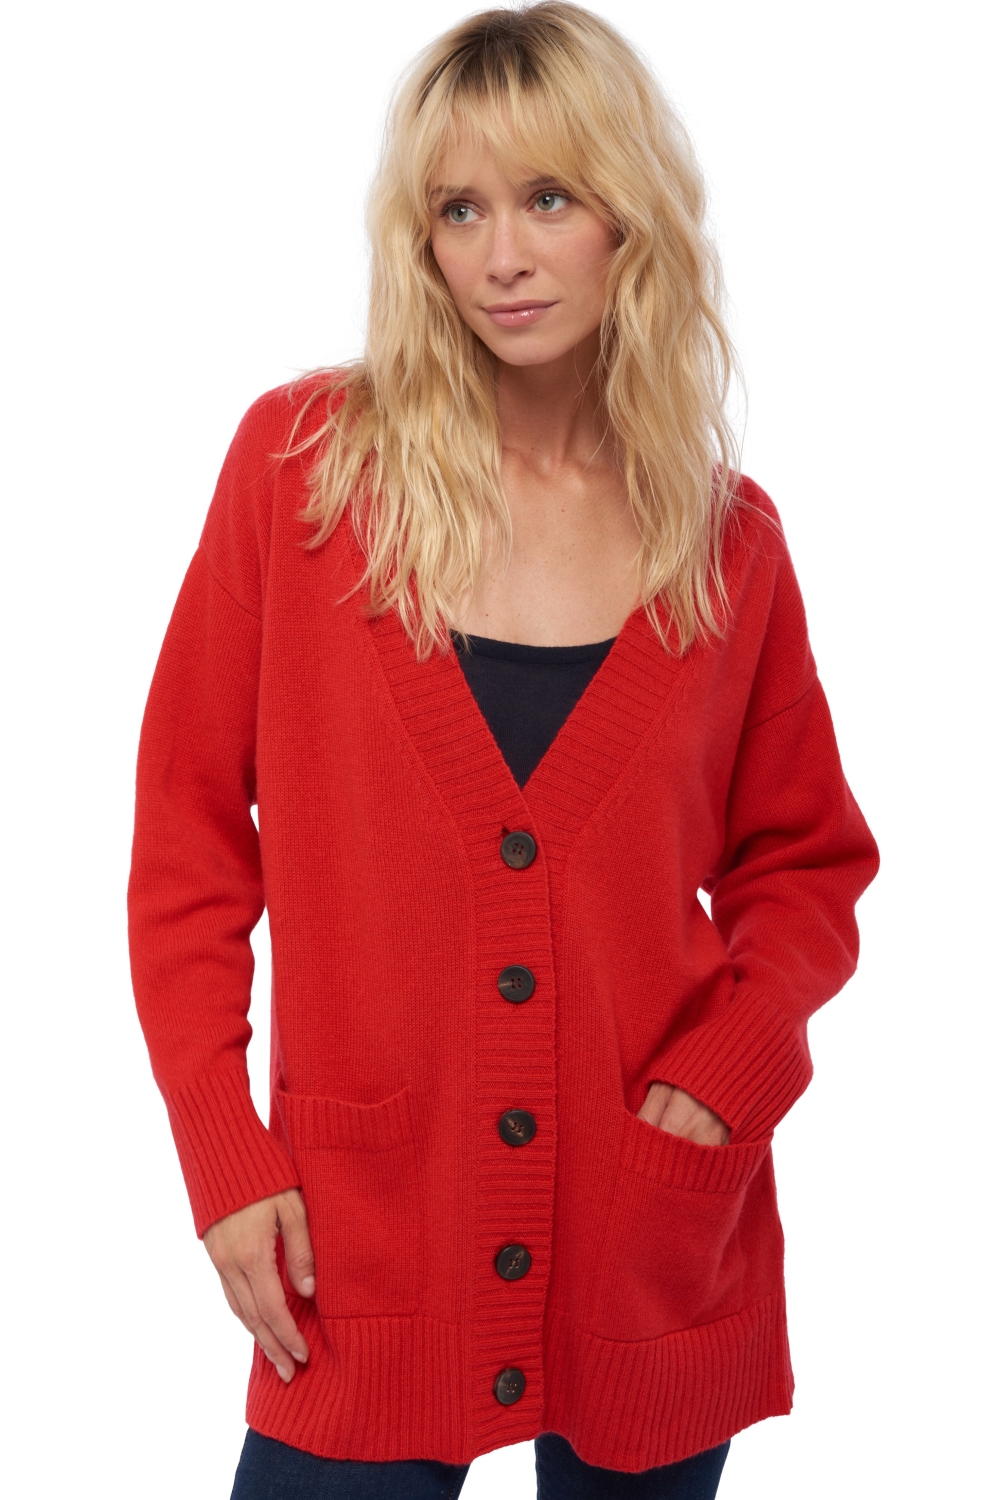 Cashmere ladies chunky sweater vadena rouge 3xl